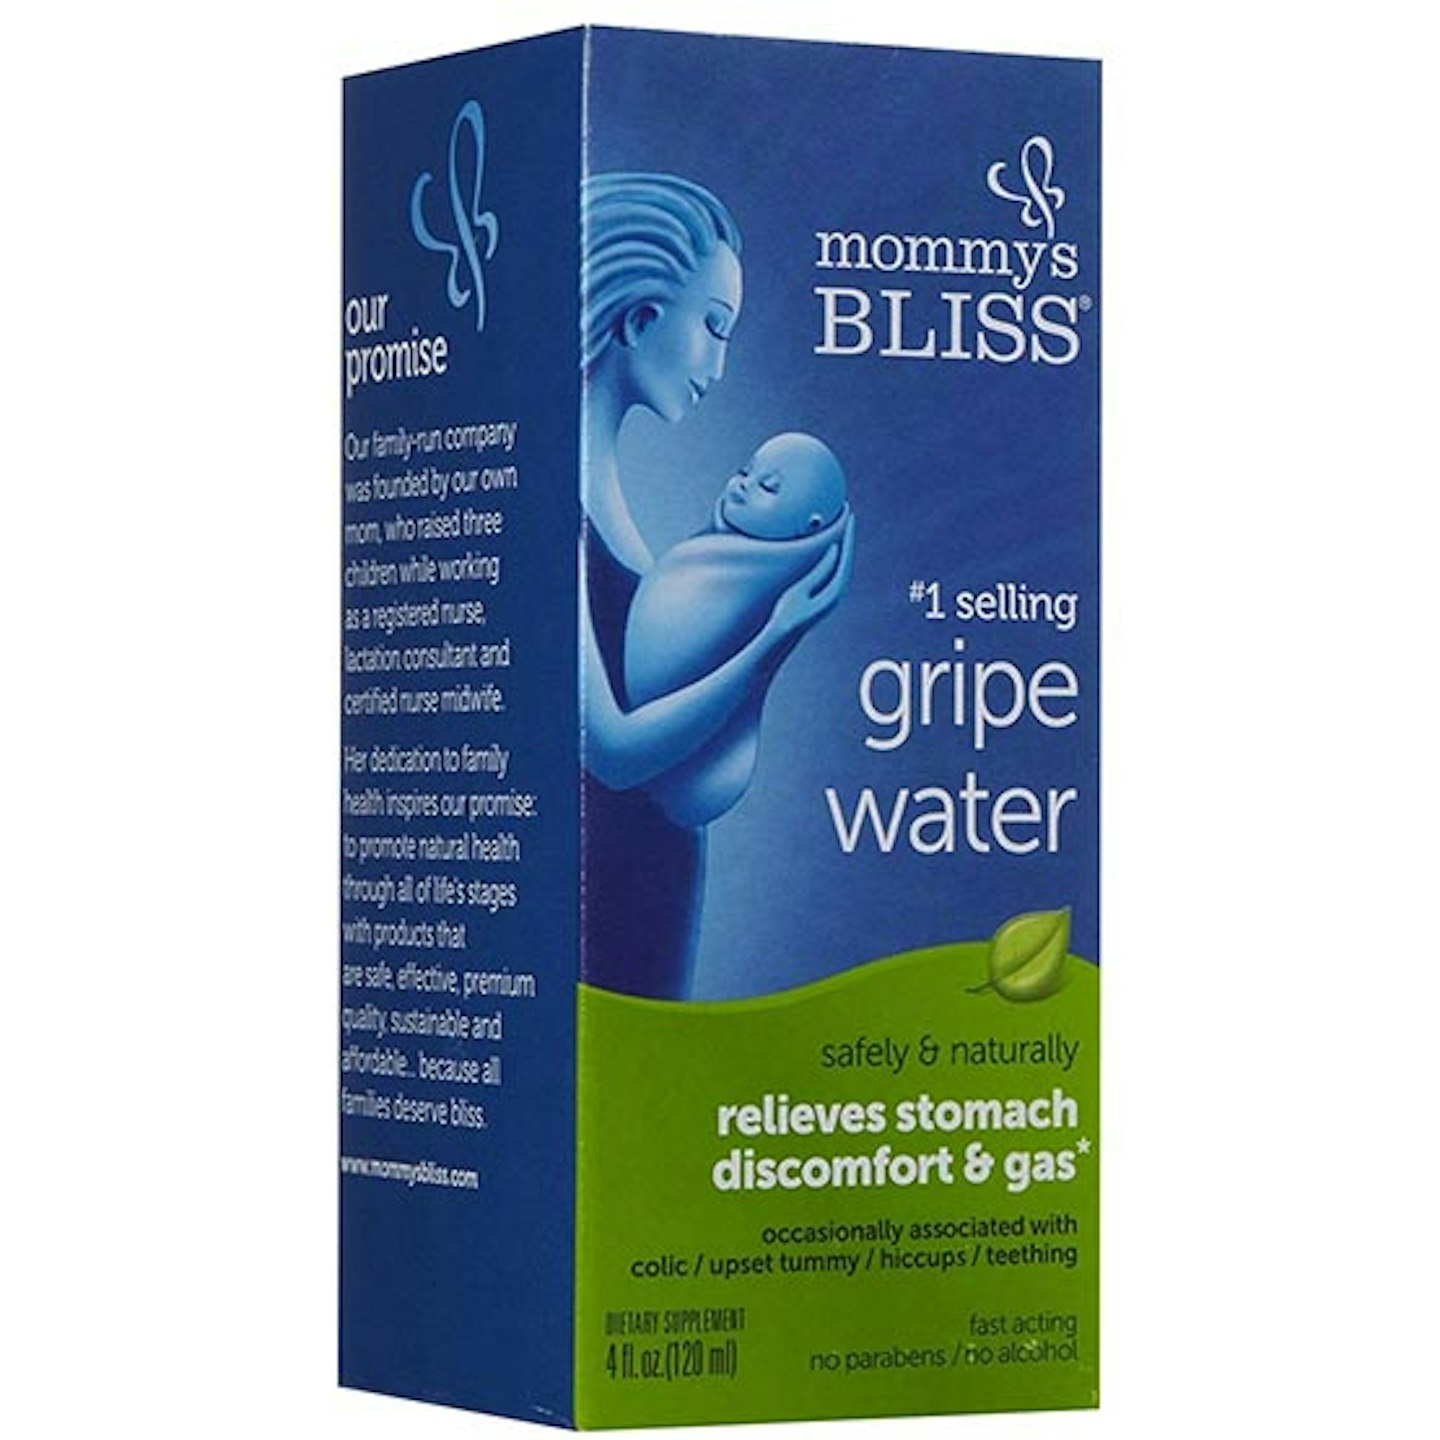 mommys bliss gripe water